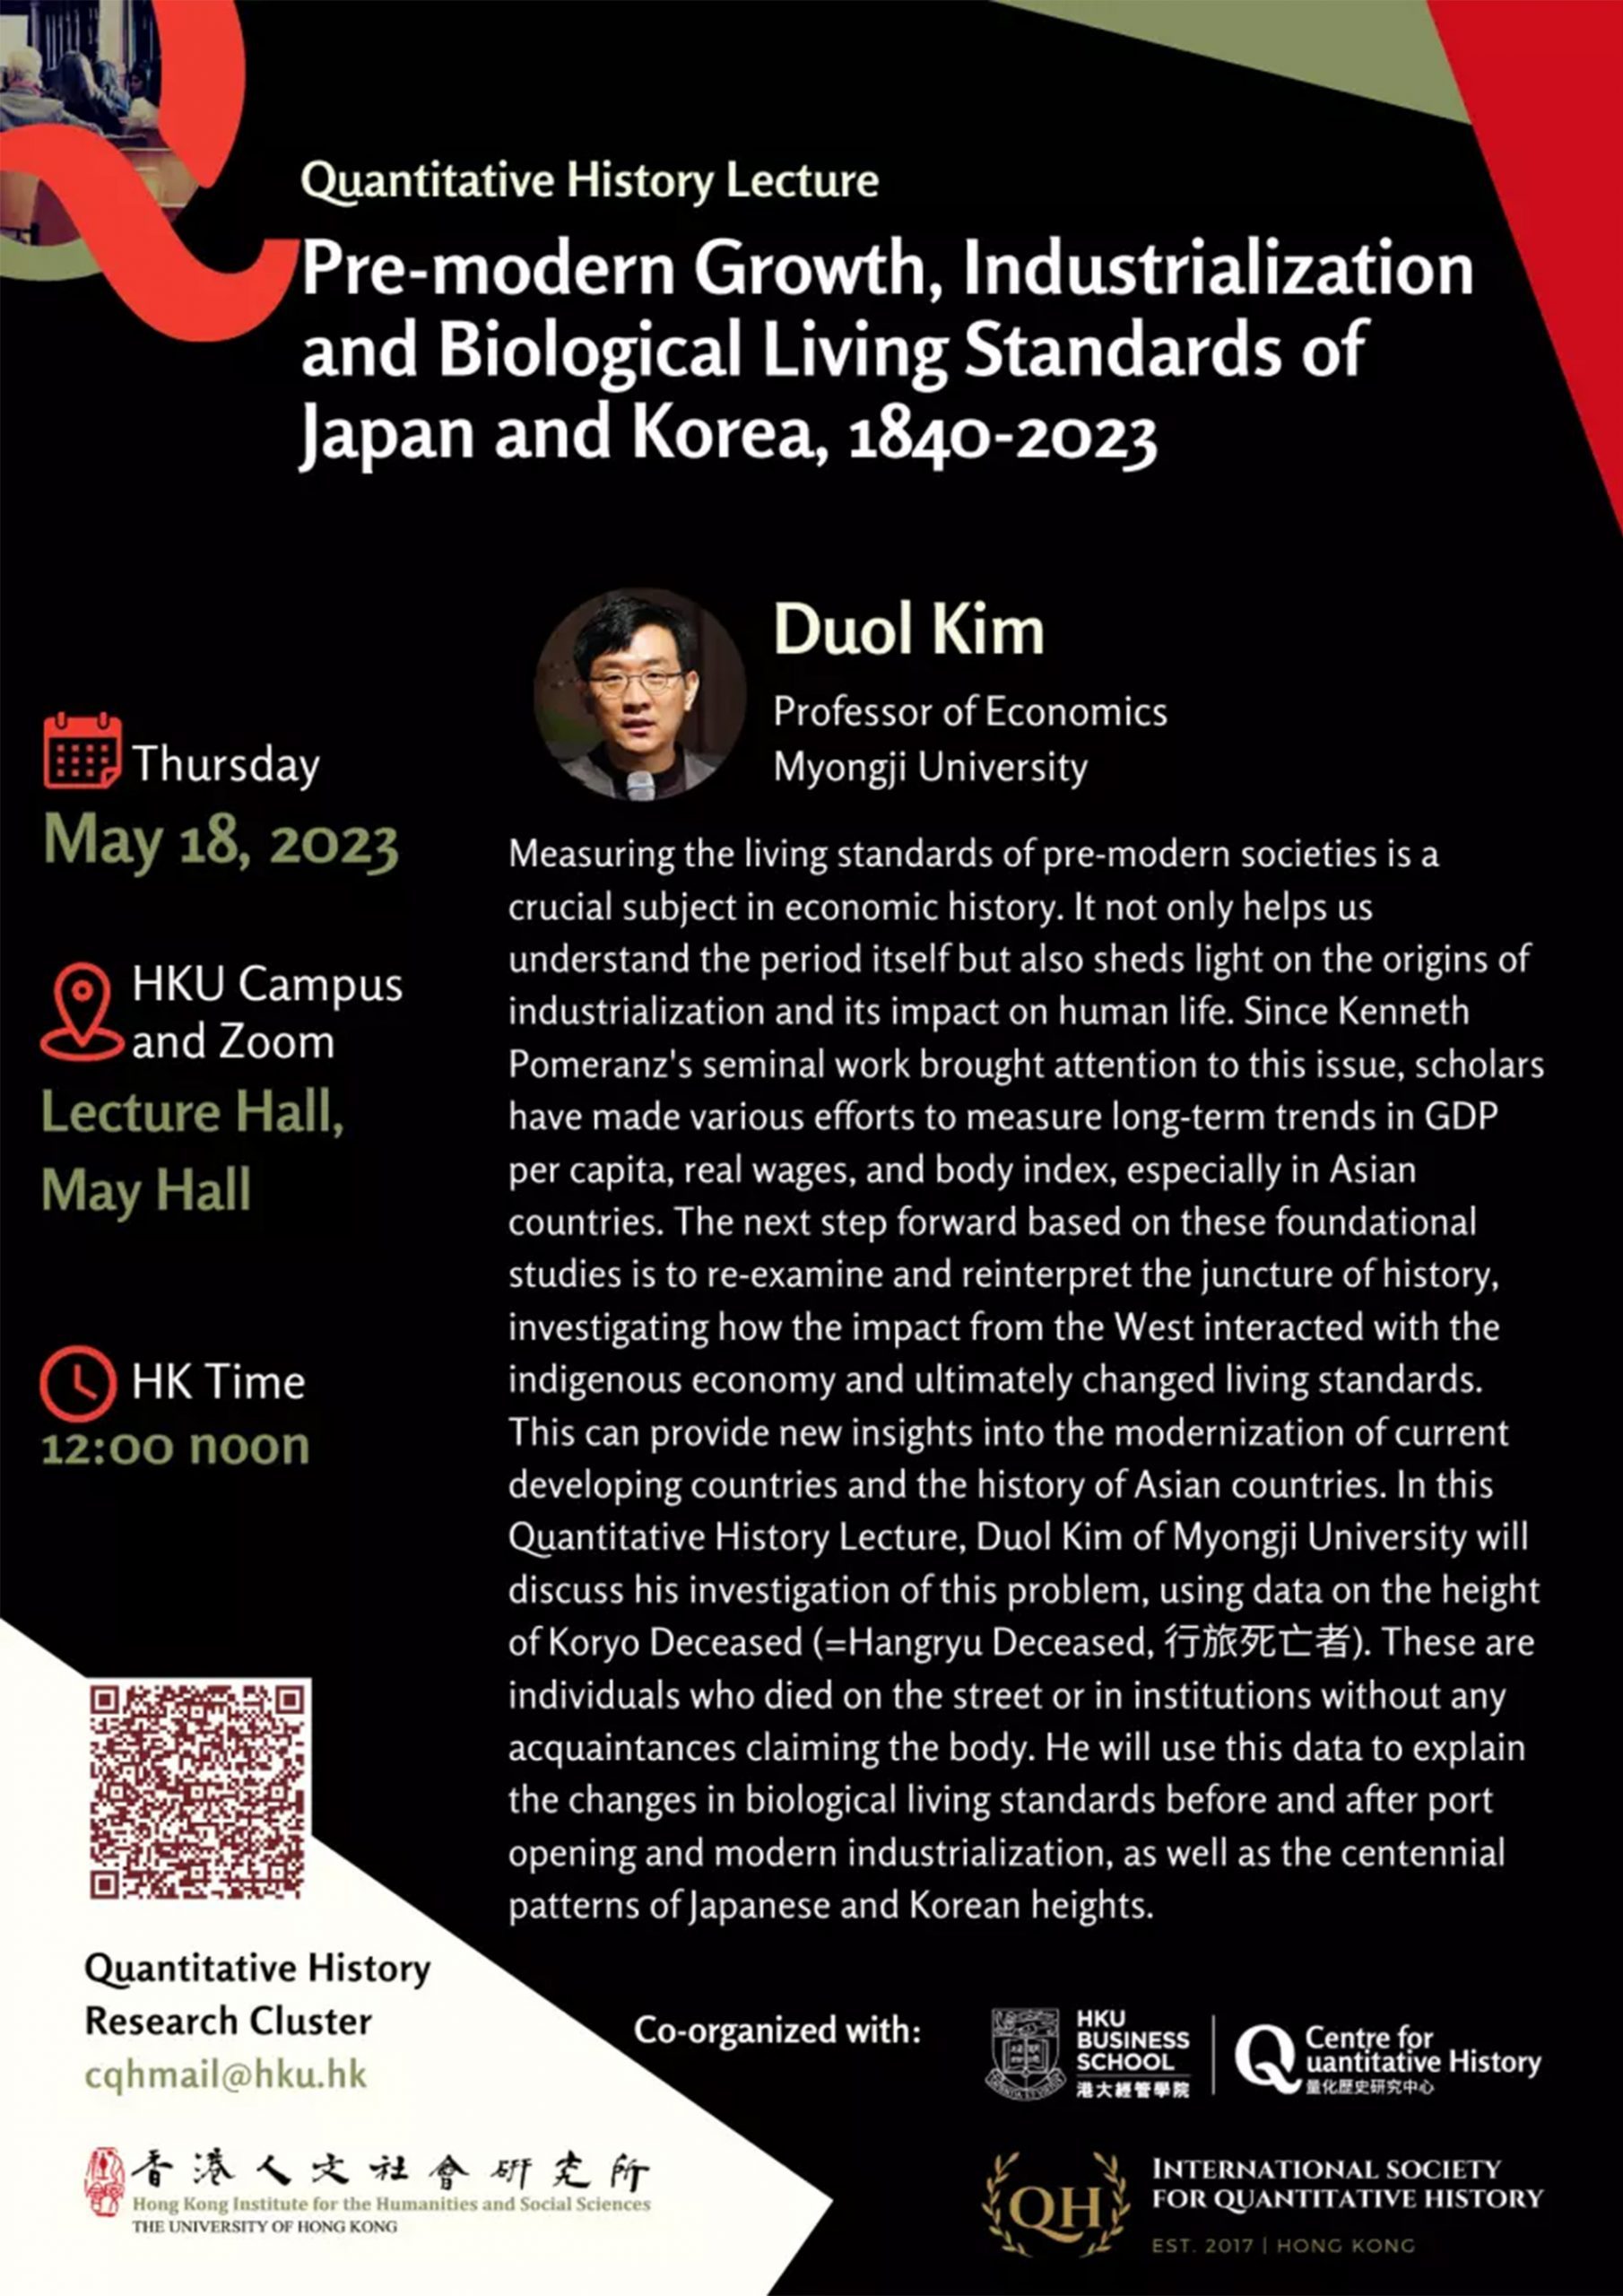 Quantitative History Lecture Series on “Pre-modern Growth, Industrialization and Biological Living Standards of Japan and Korea, 1840 – 2023” by Professor Duol Kim (May 18 2023)